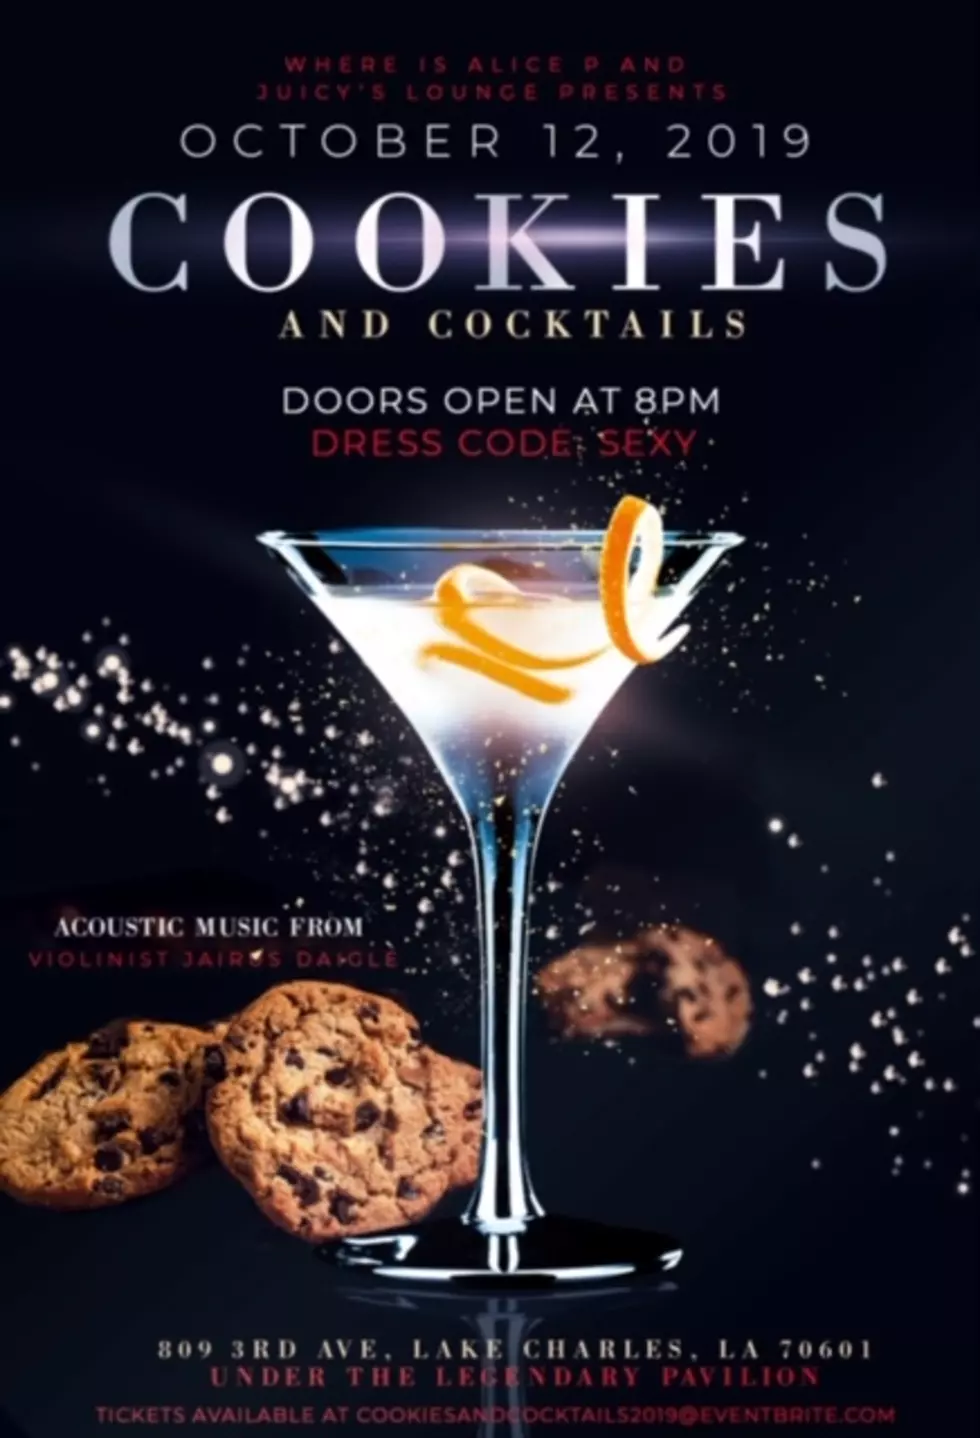 Juicys Lounge Presents Cookies And Cocktails This Saturday Night